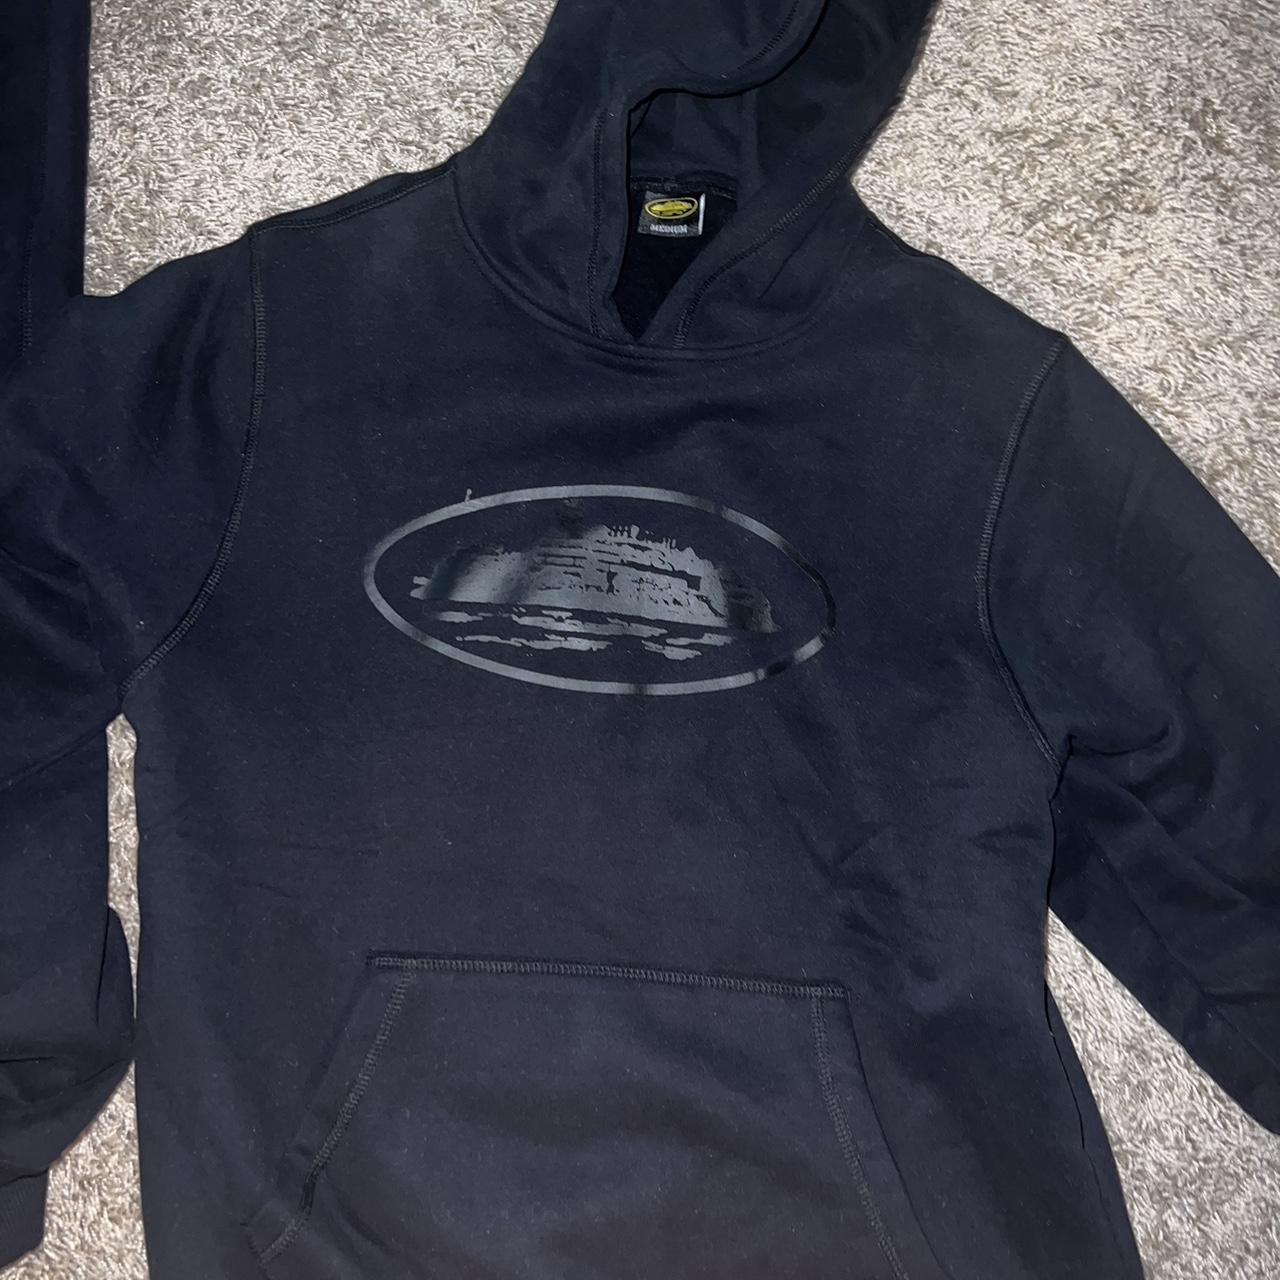 BLACK CORTIEZ HOODIE LIKE NEW COMES WITH TAGS AND BAG - Depop